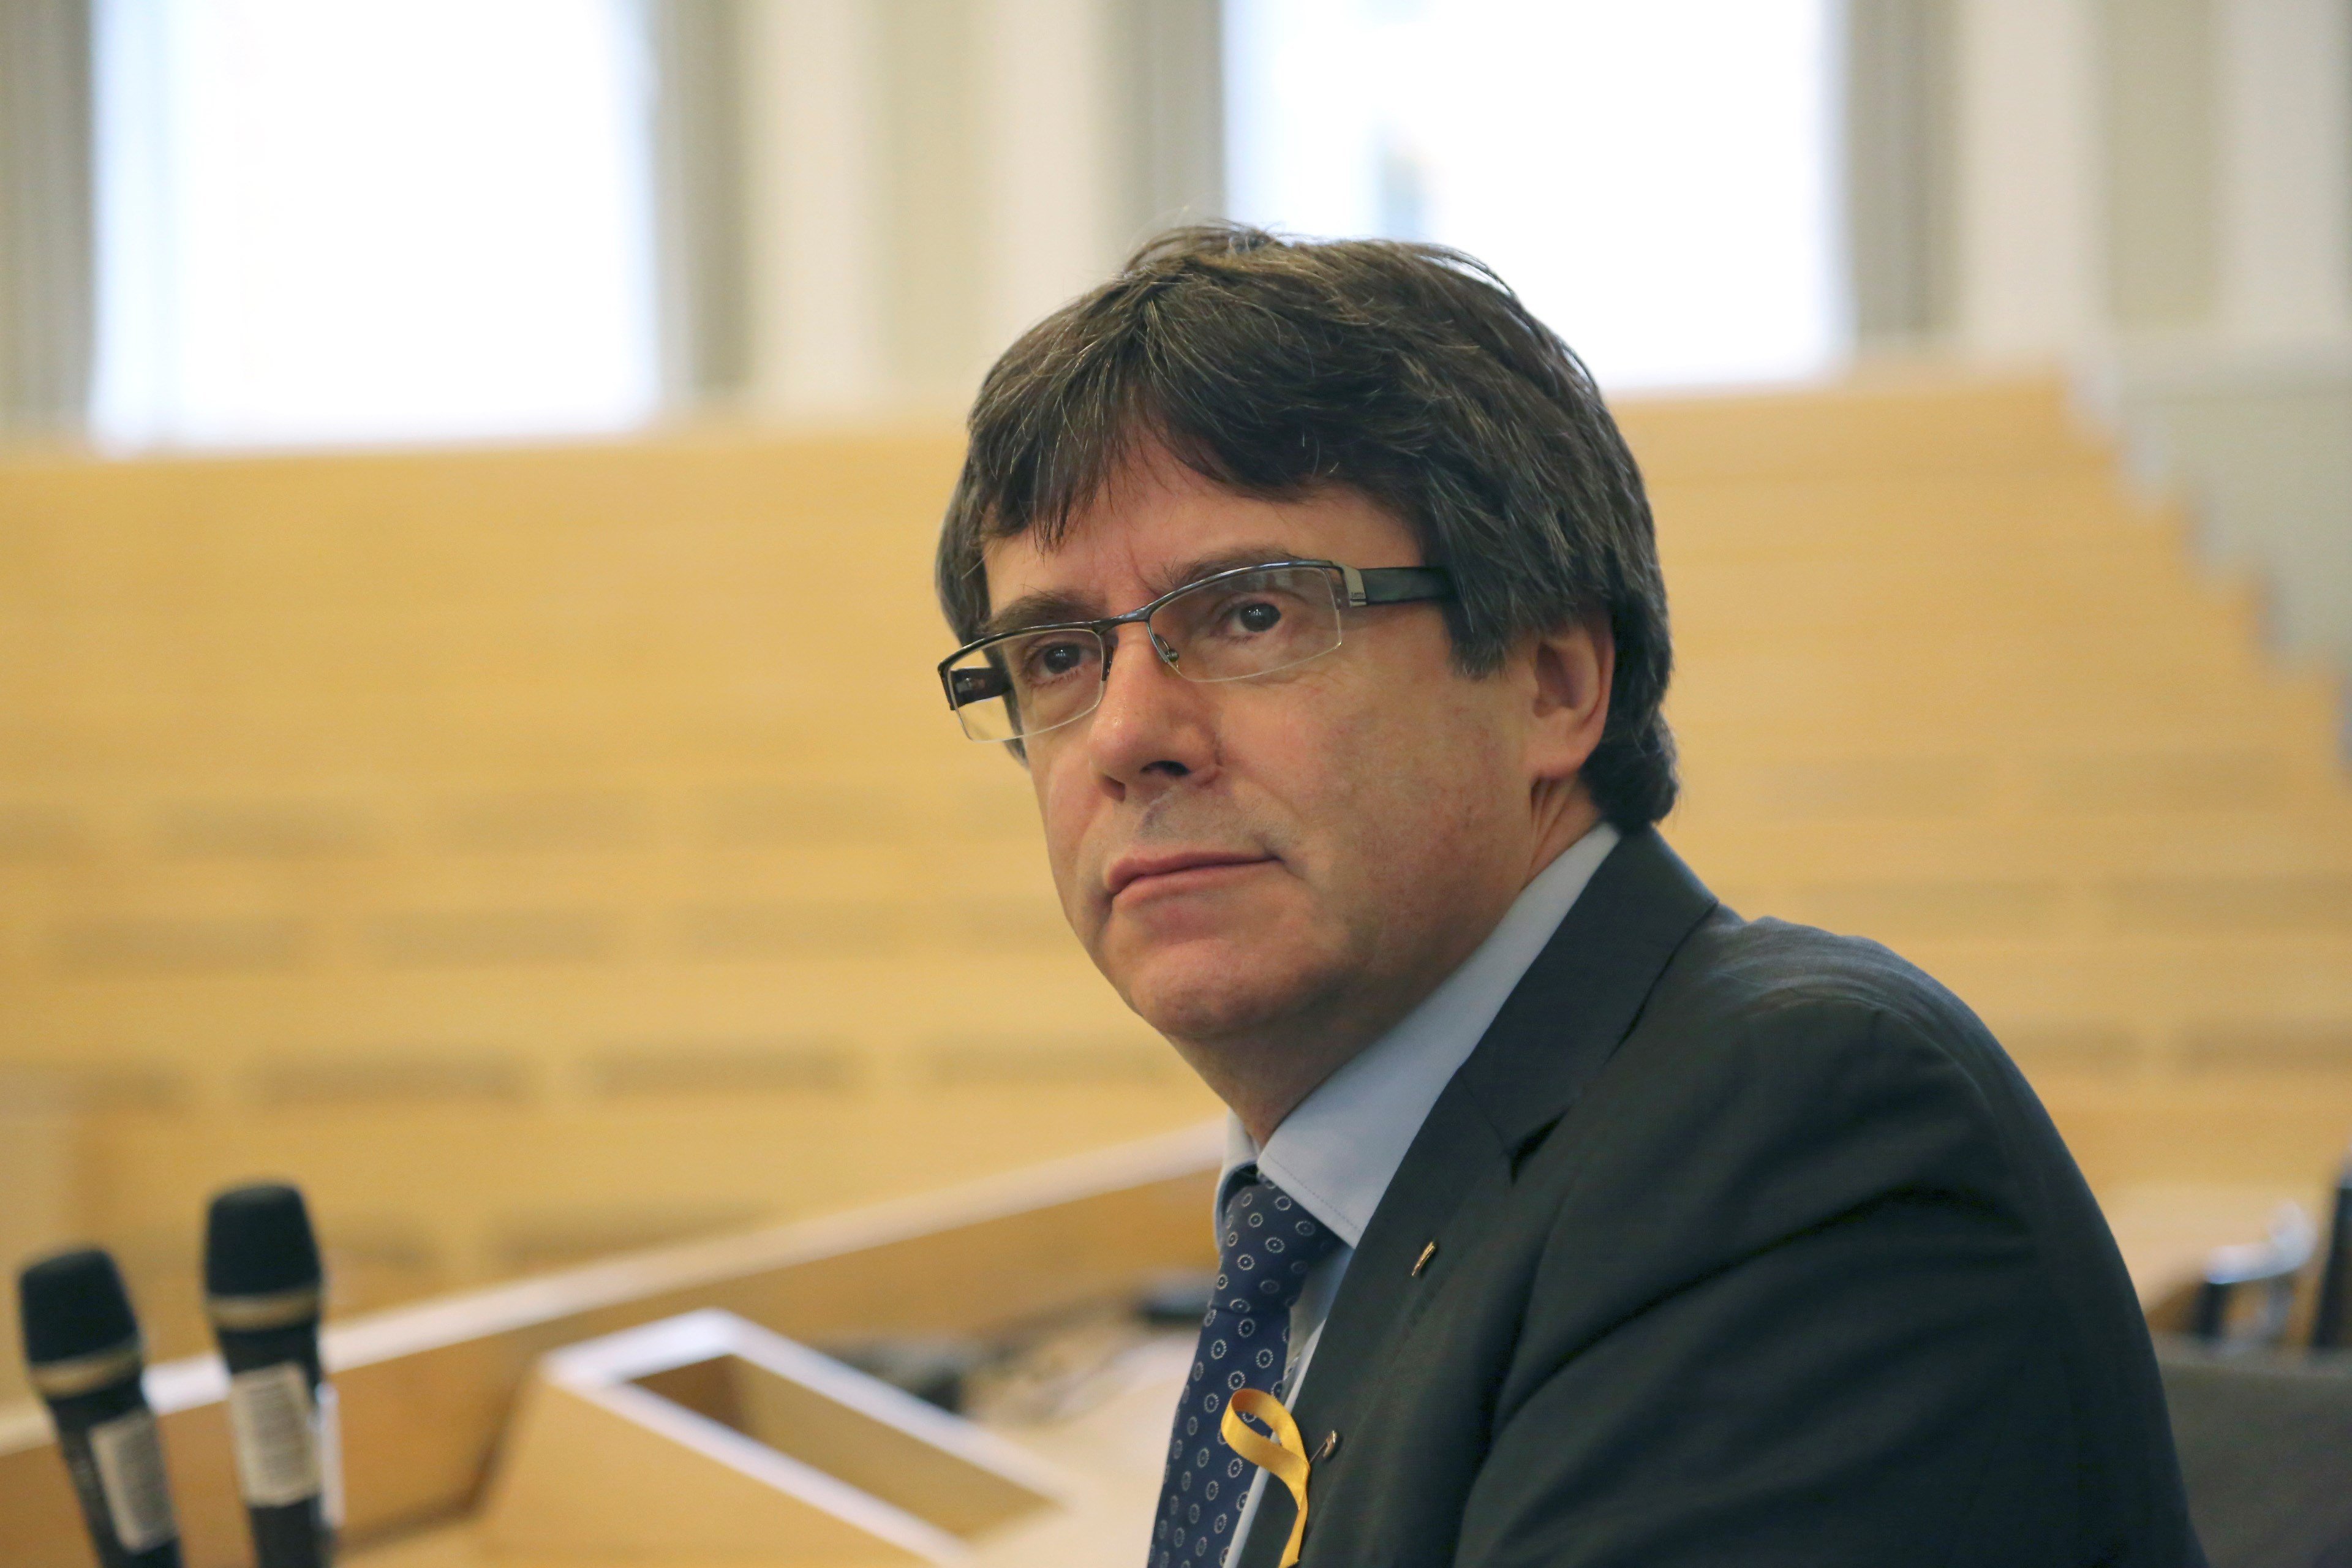 Political asylum in Germany? Puigdemont weighing up possibility, say reports